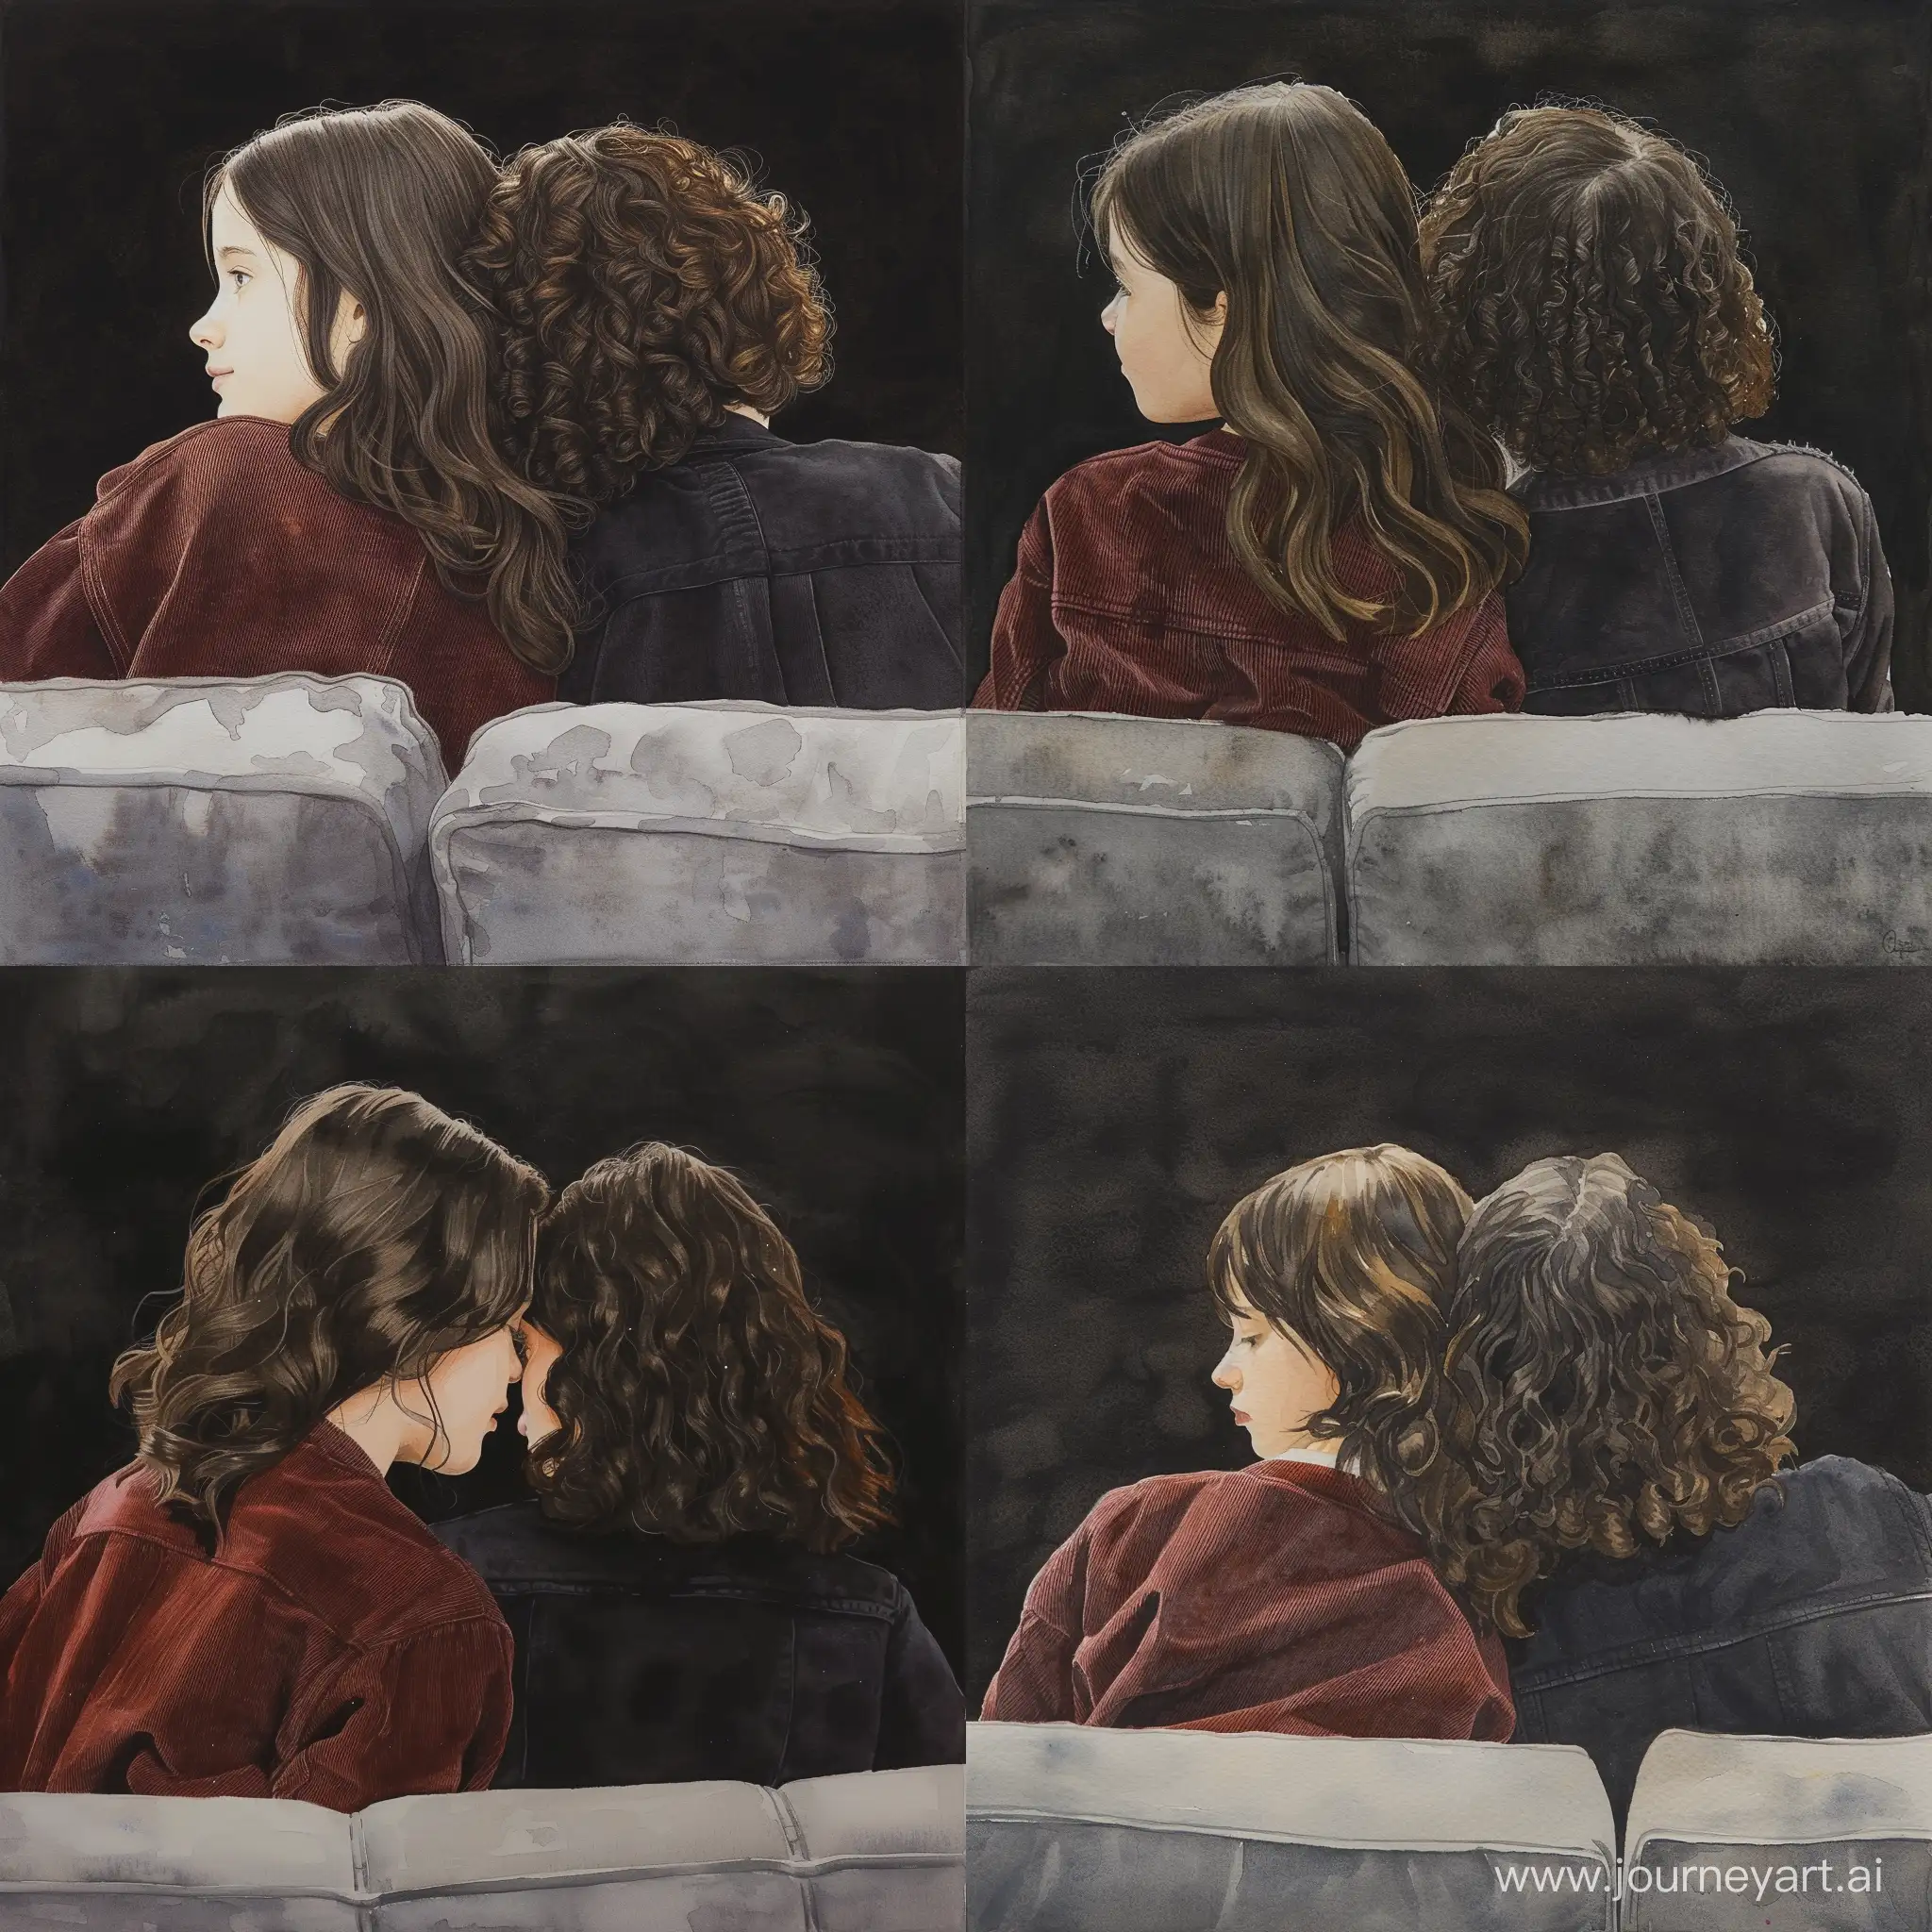 Teenage-Girls-Relaxing-Together-on-Gray-Sofa-in-Corduroy-Jackets